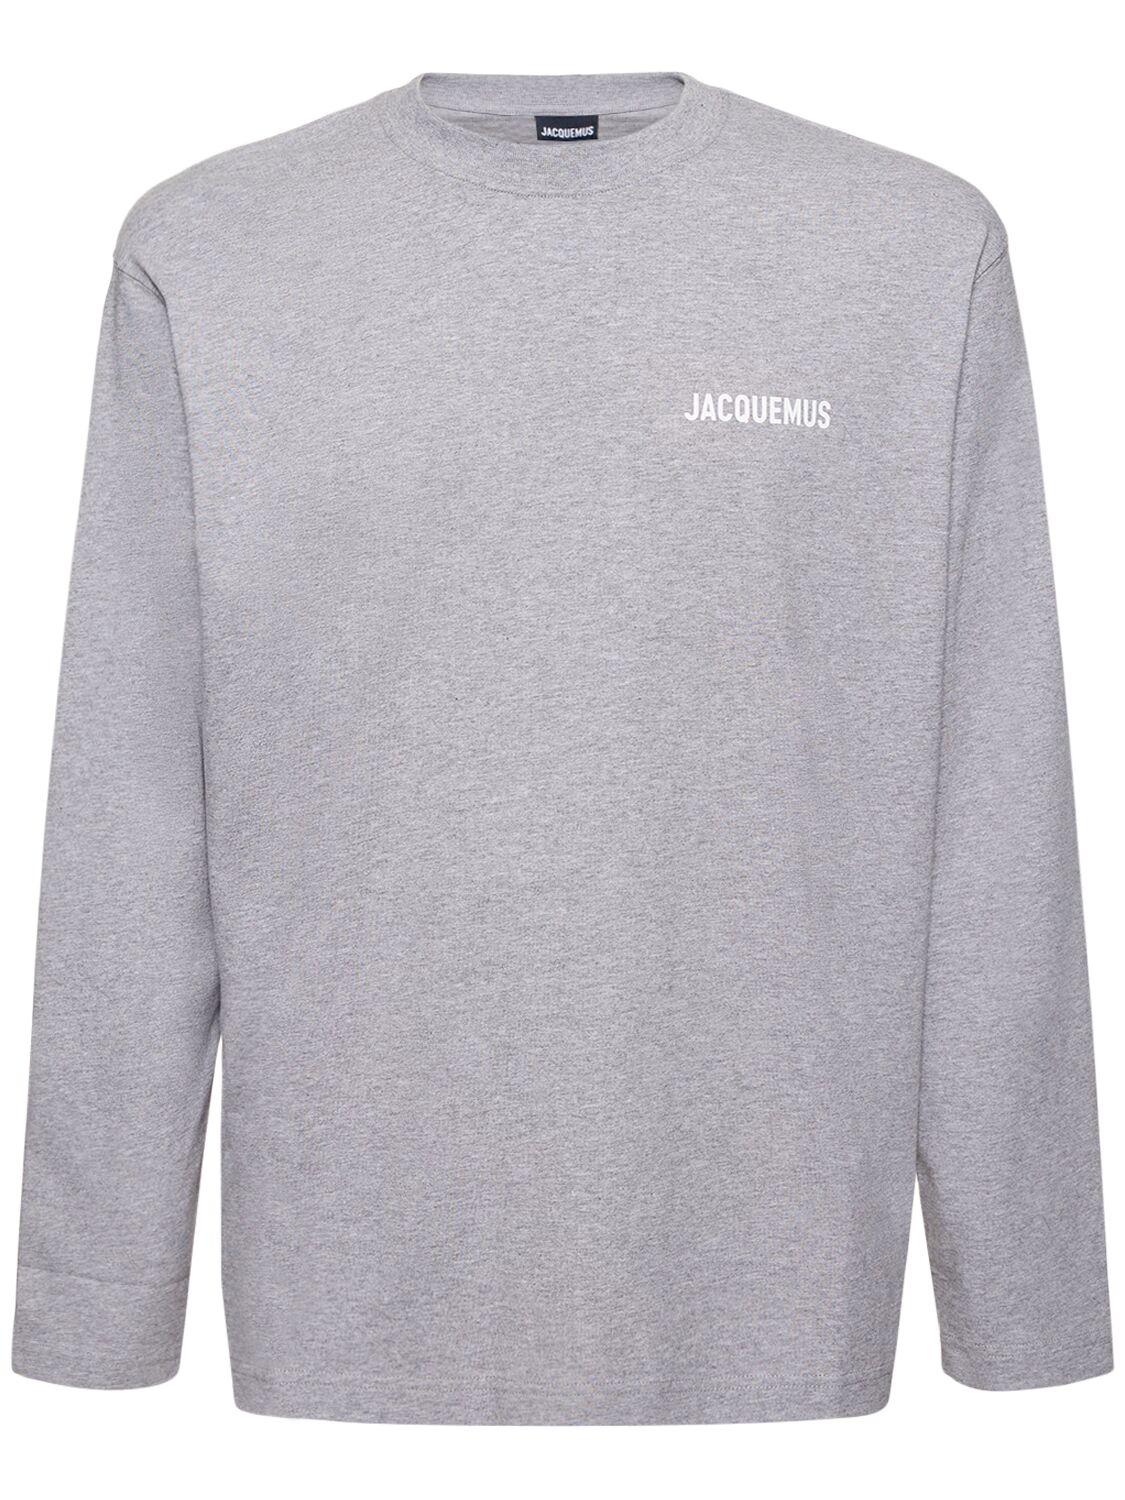 Jacquemus Le Tshirt Cotton Long Sleeve T-shirt In Grey